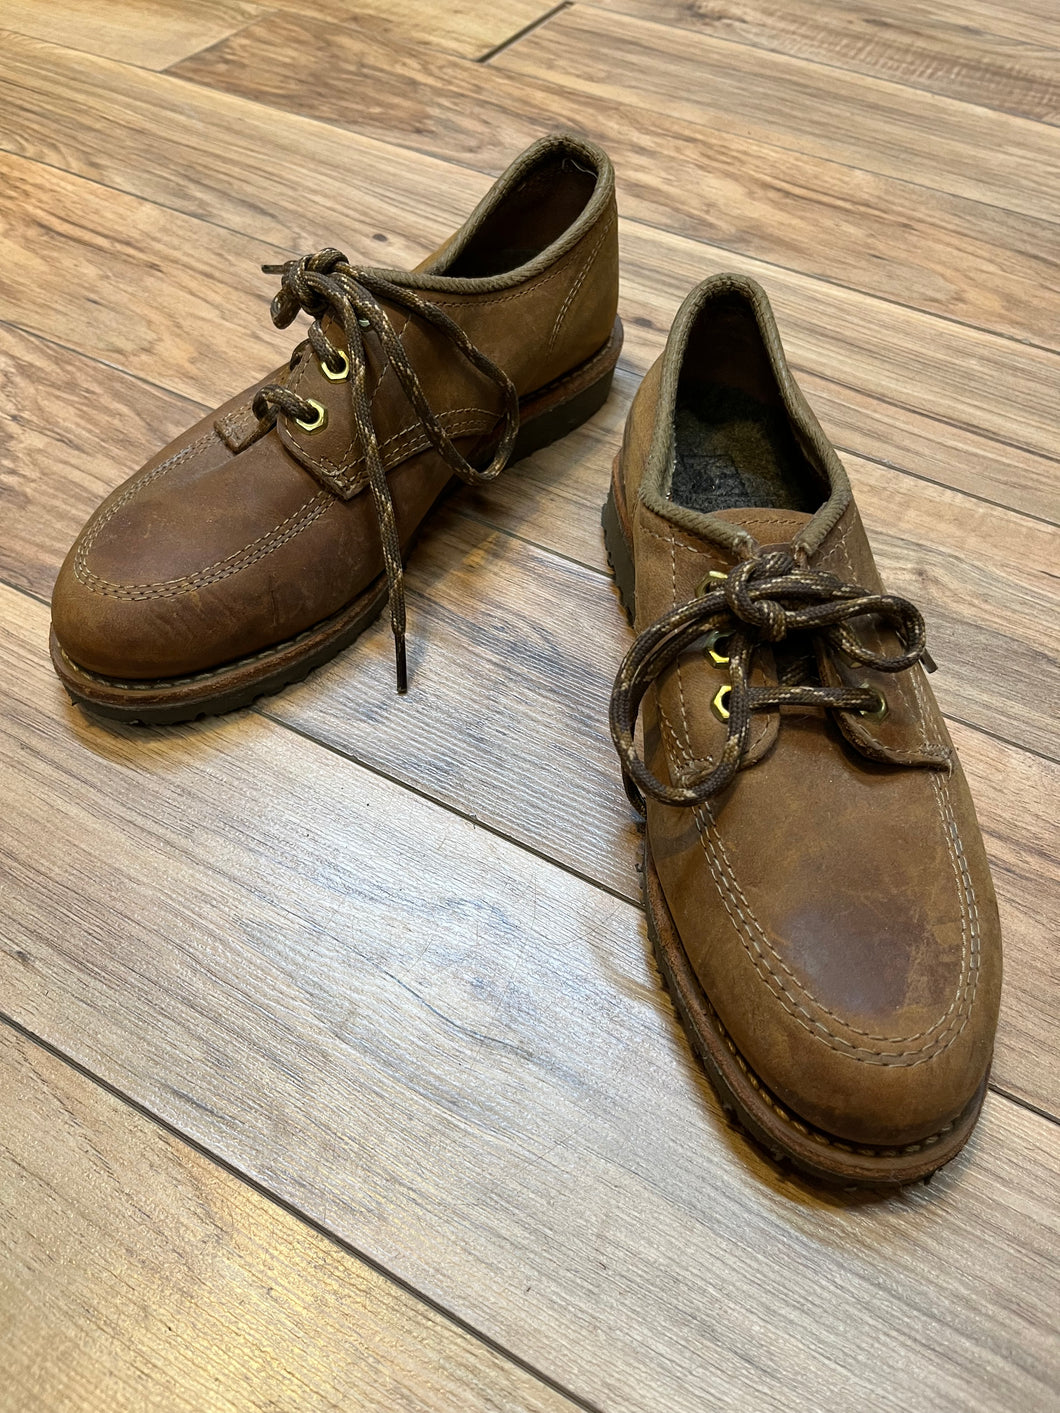 Vintage Prospector 1980’s NWOT deadstock moc toe three eyelet brown leather shoes, Made in Canada

Size US 9 womens